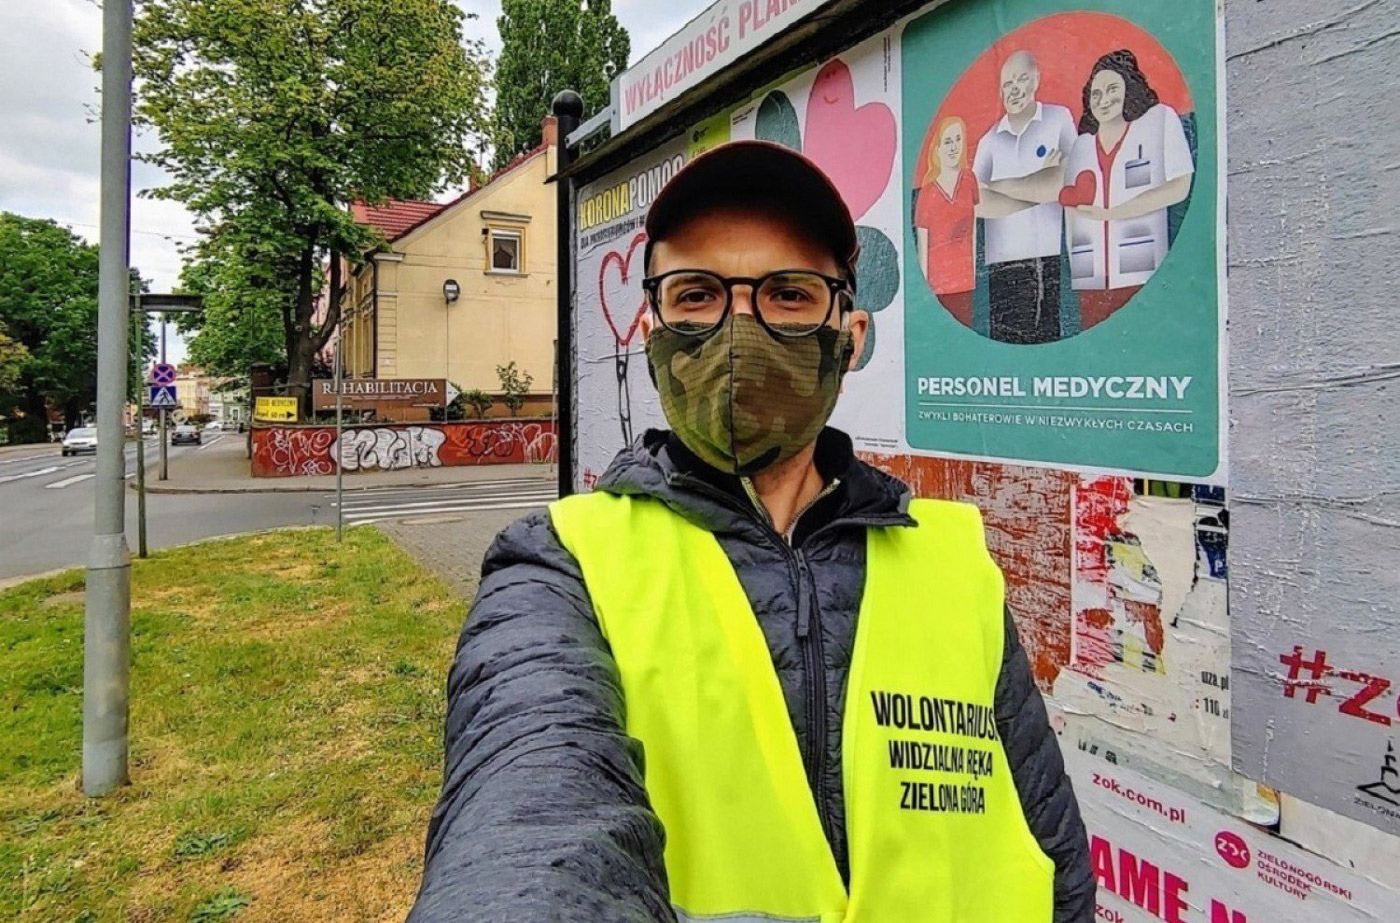 The power of the volunteer: a Visible Hand activist from the local group in Zielona Gora.